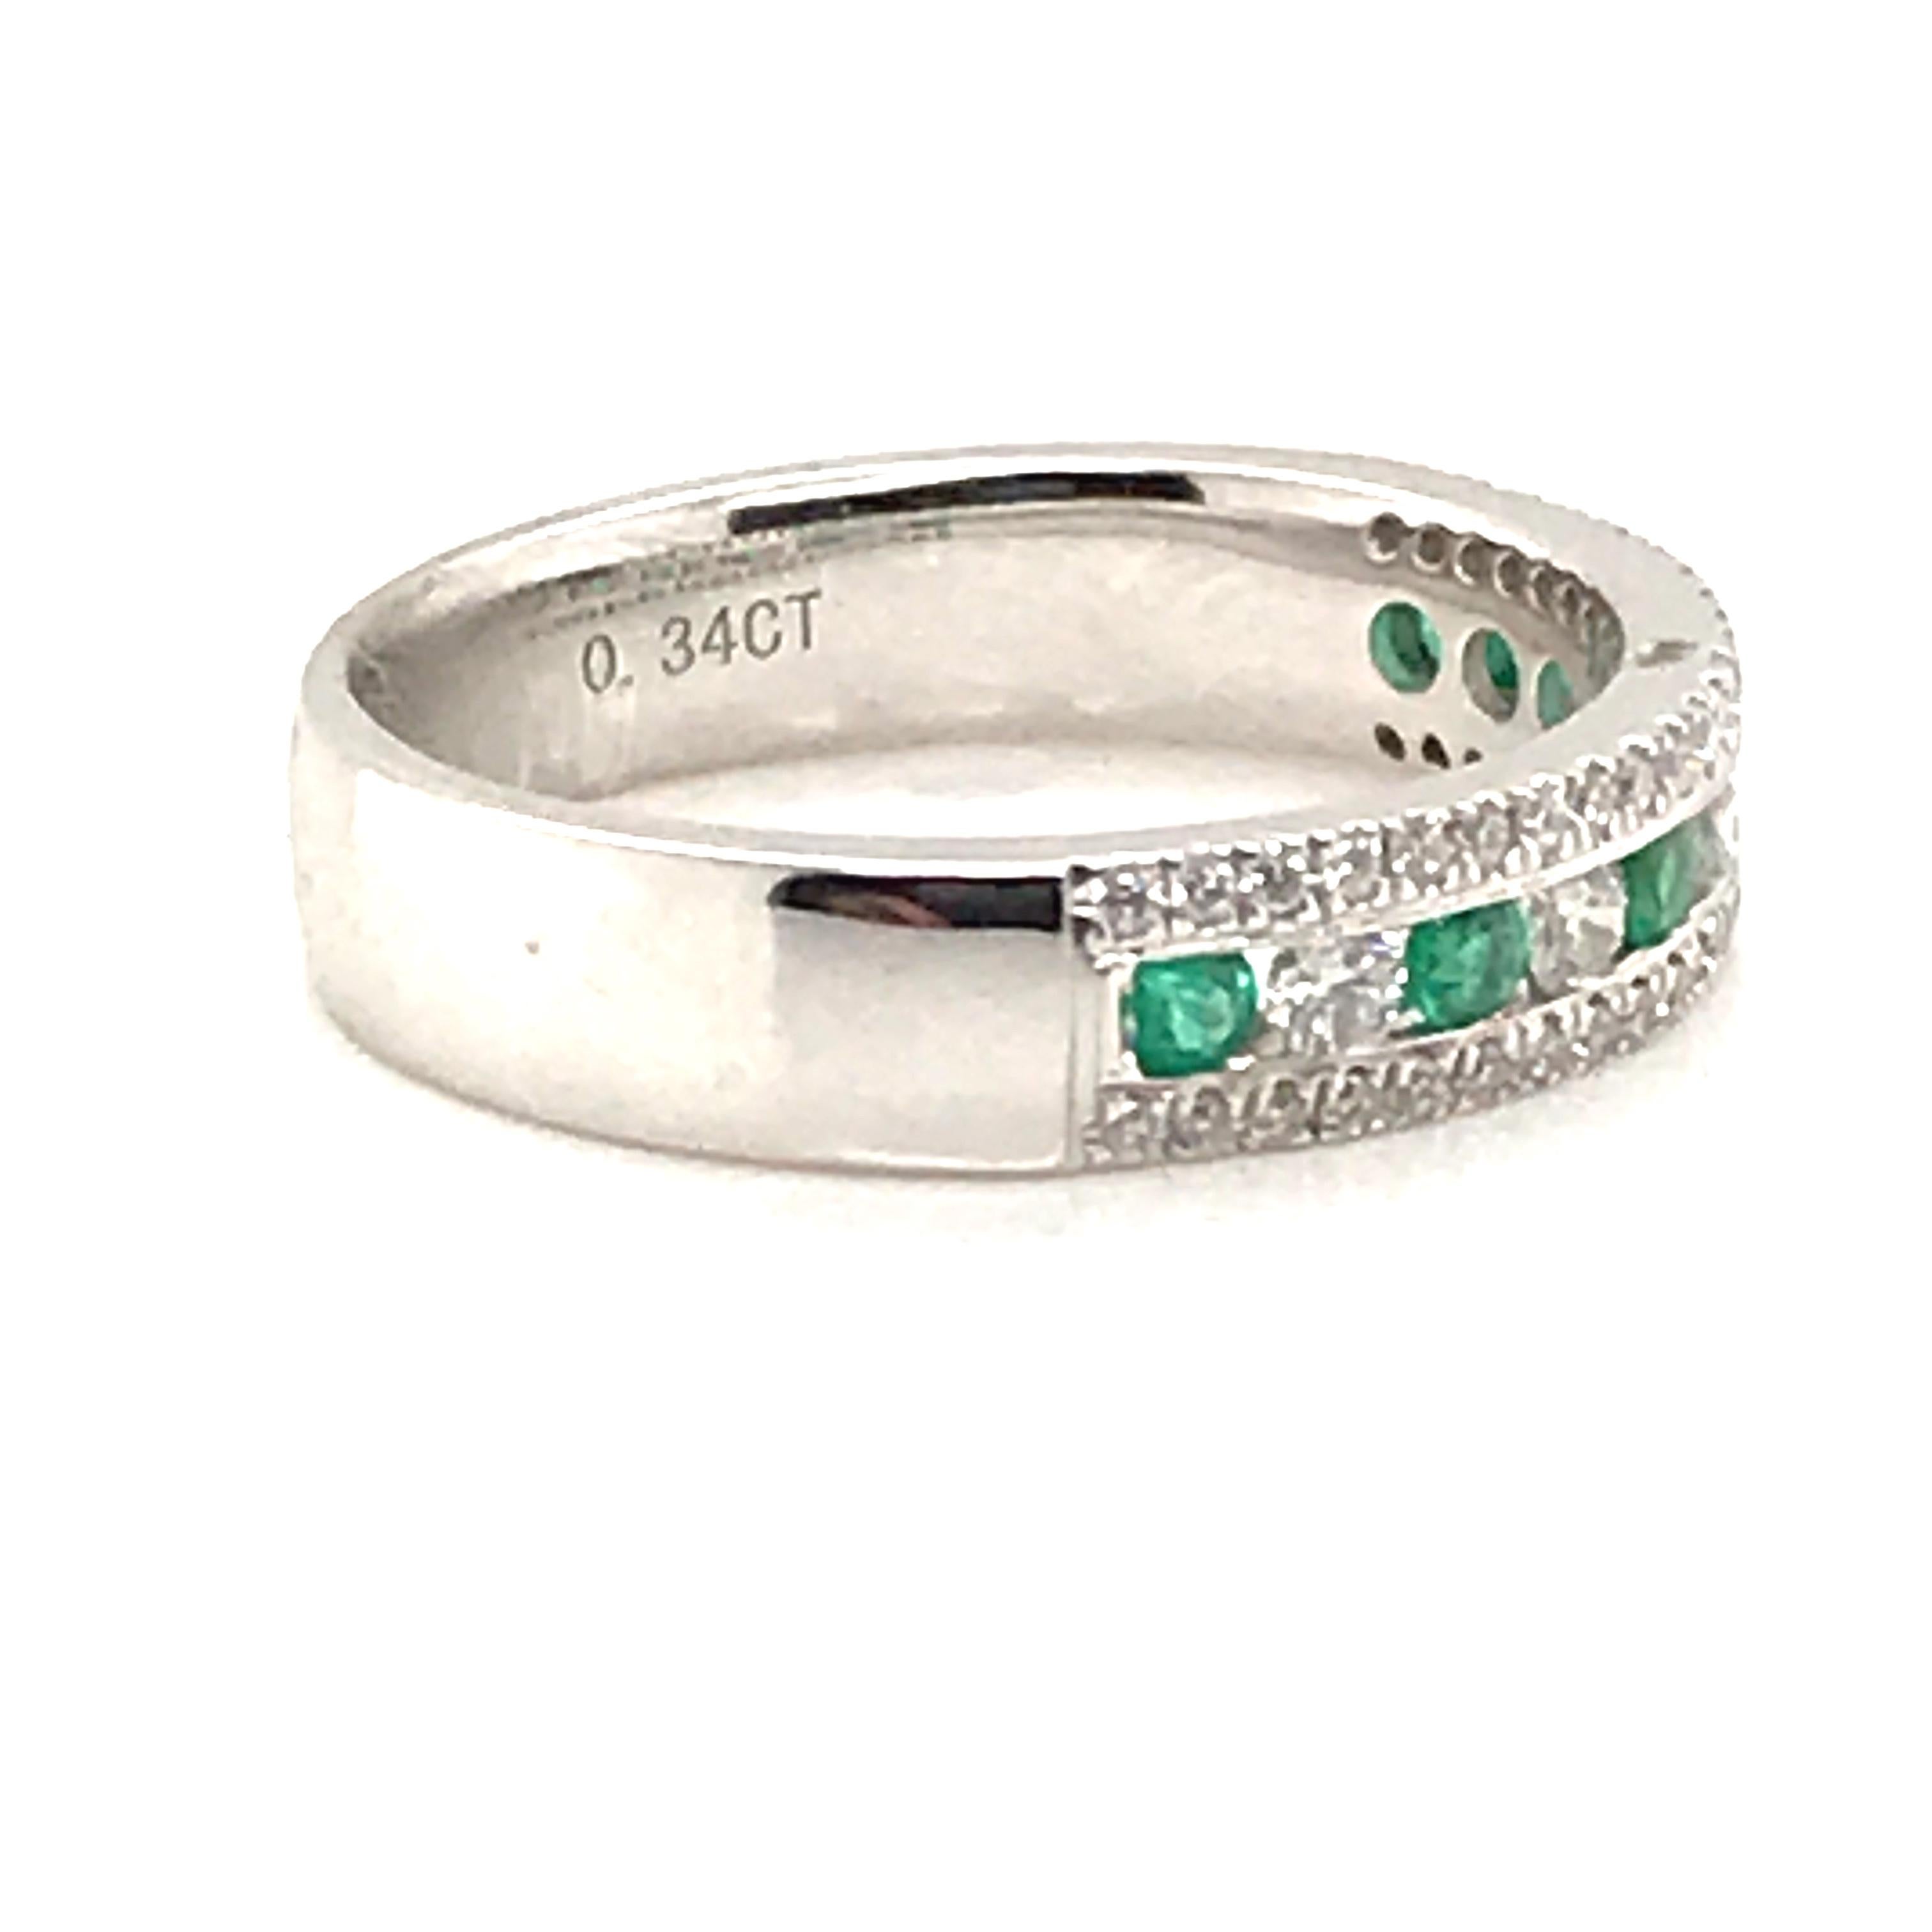 HJN Inc. Ring featuring a Natural Emerald and Diamond Channel Band

Emerald Weight: 0.18 Carats 
Round-Cut Diamond Weight: 0.34 Carats 

Clarity Grade: SI1 
Color Grade: G
Polish and Symmetry: Very Good
Style Number: AE1024EDWG